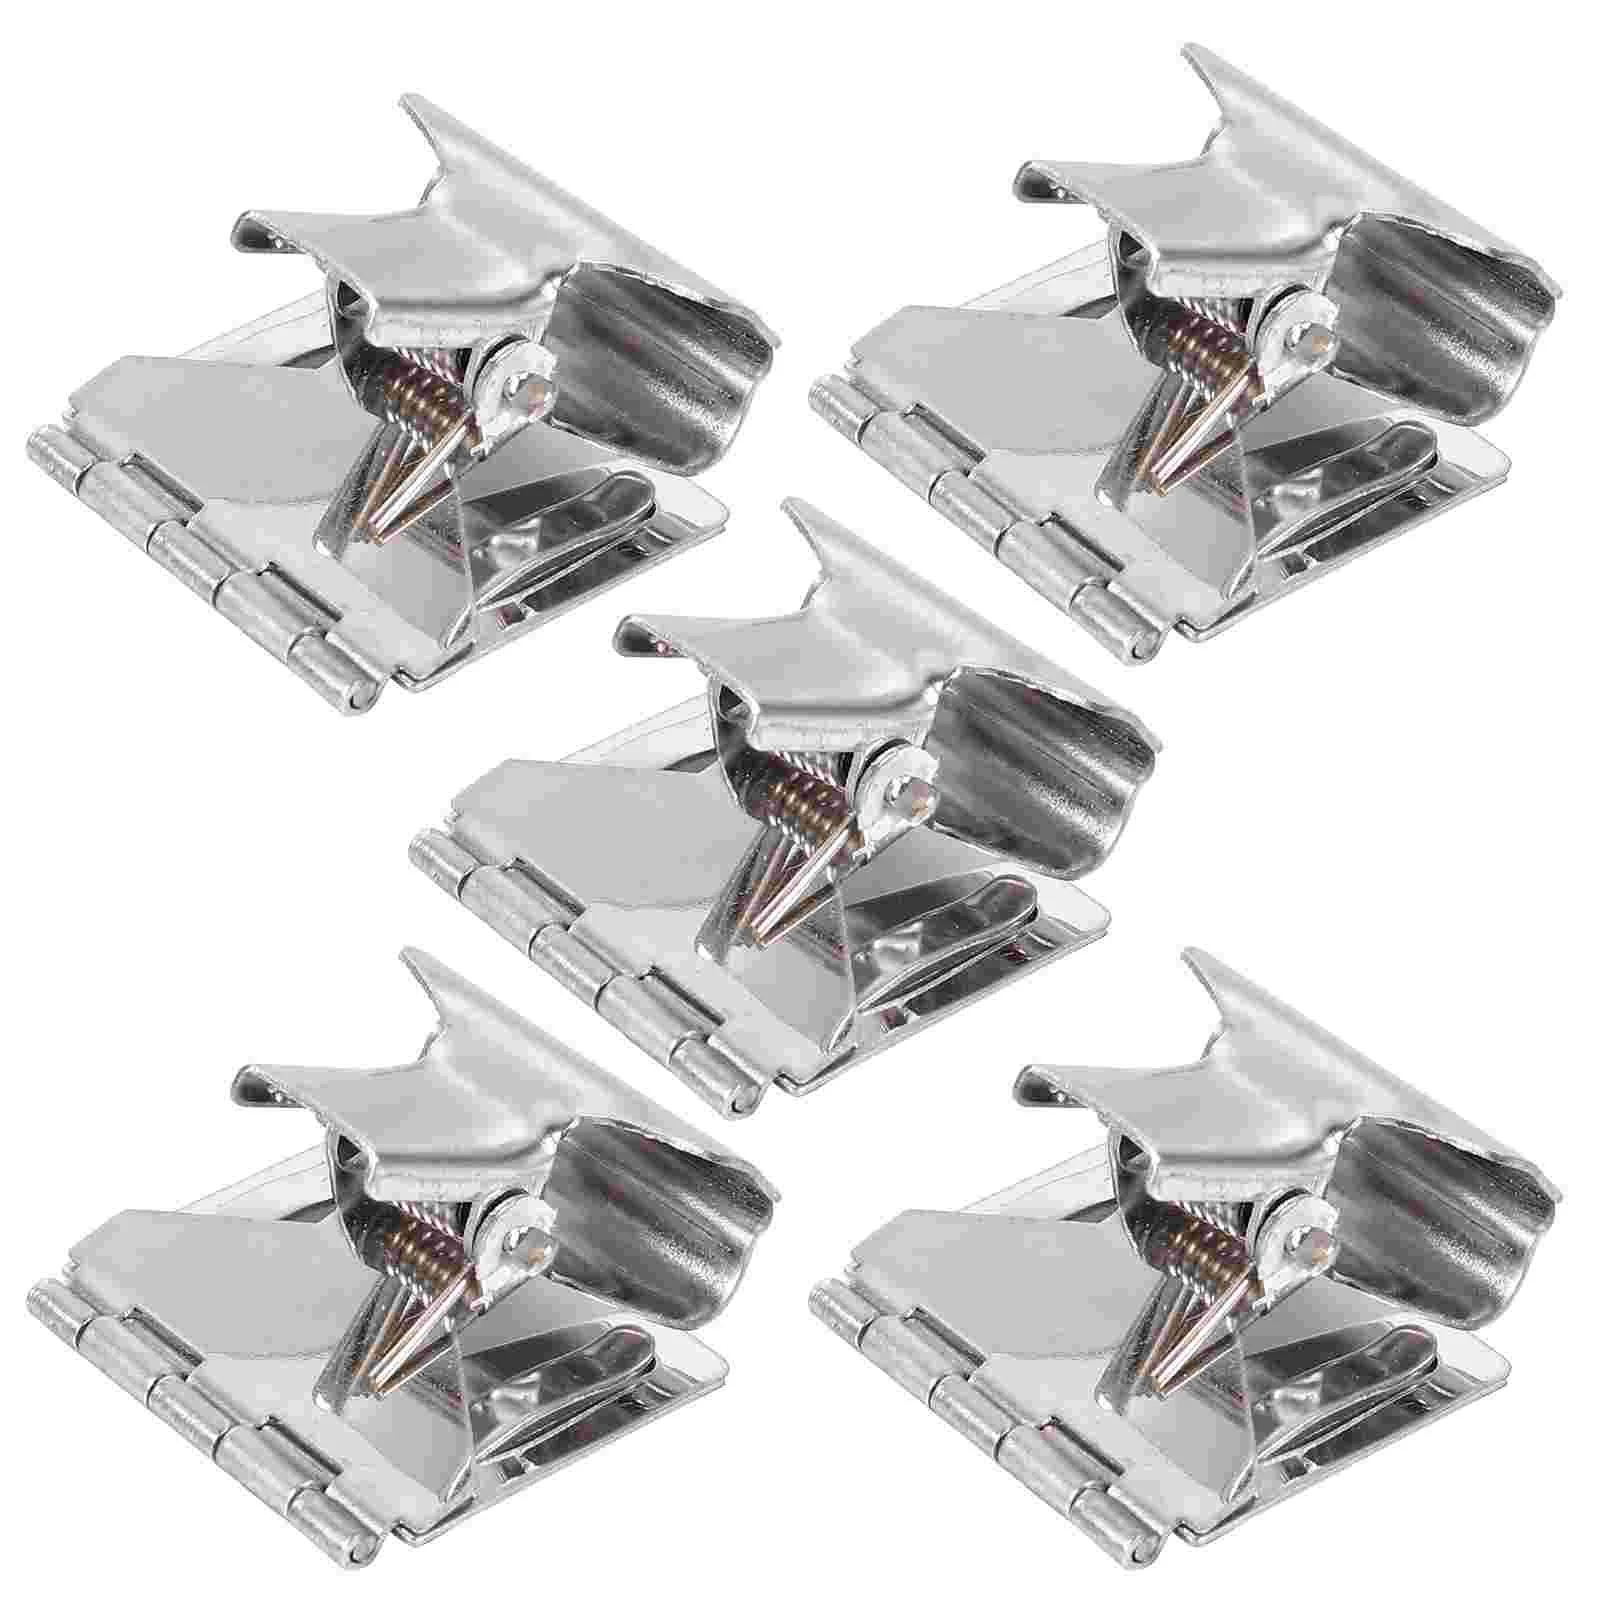 

5 Pcs Price Tag Clip Label Holder Clamp Supermarkets Display Clips Shelf Braces The Sign Promotional Clamps Electroplated Iron